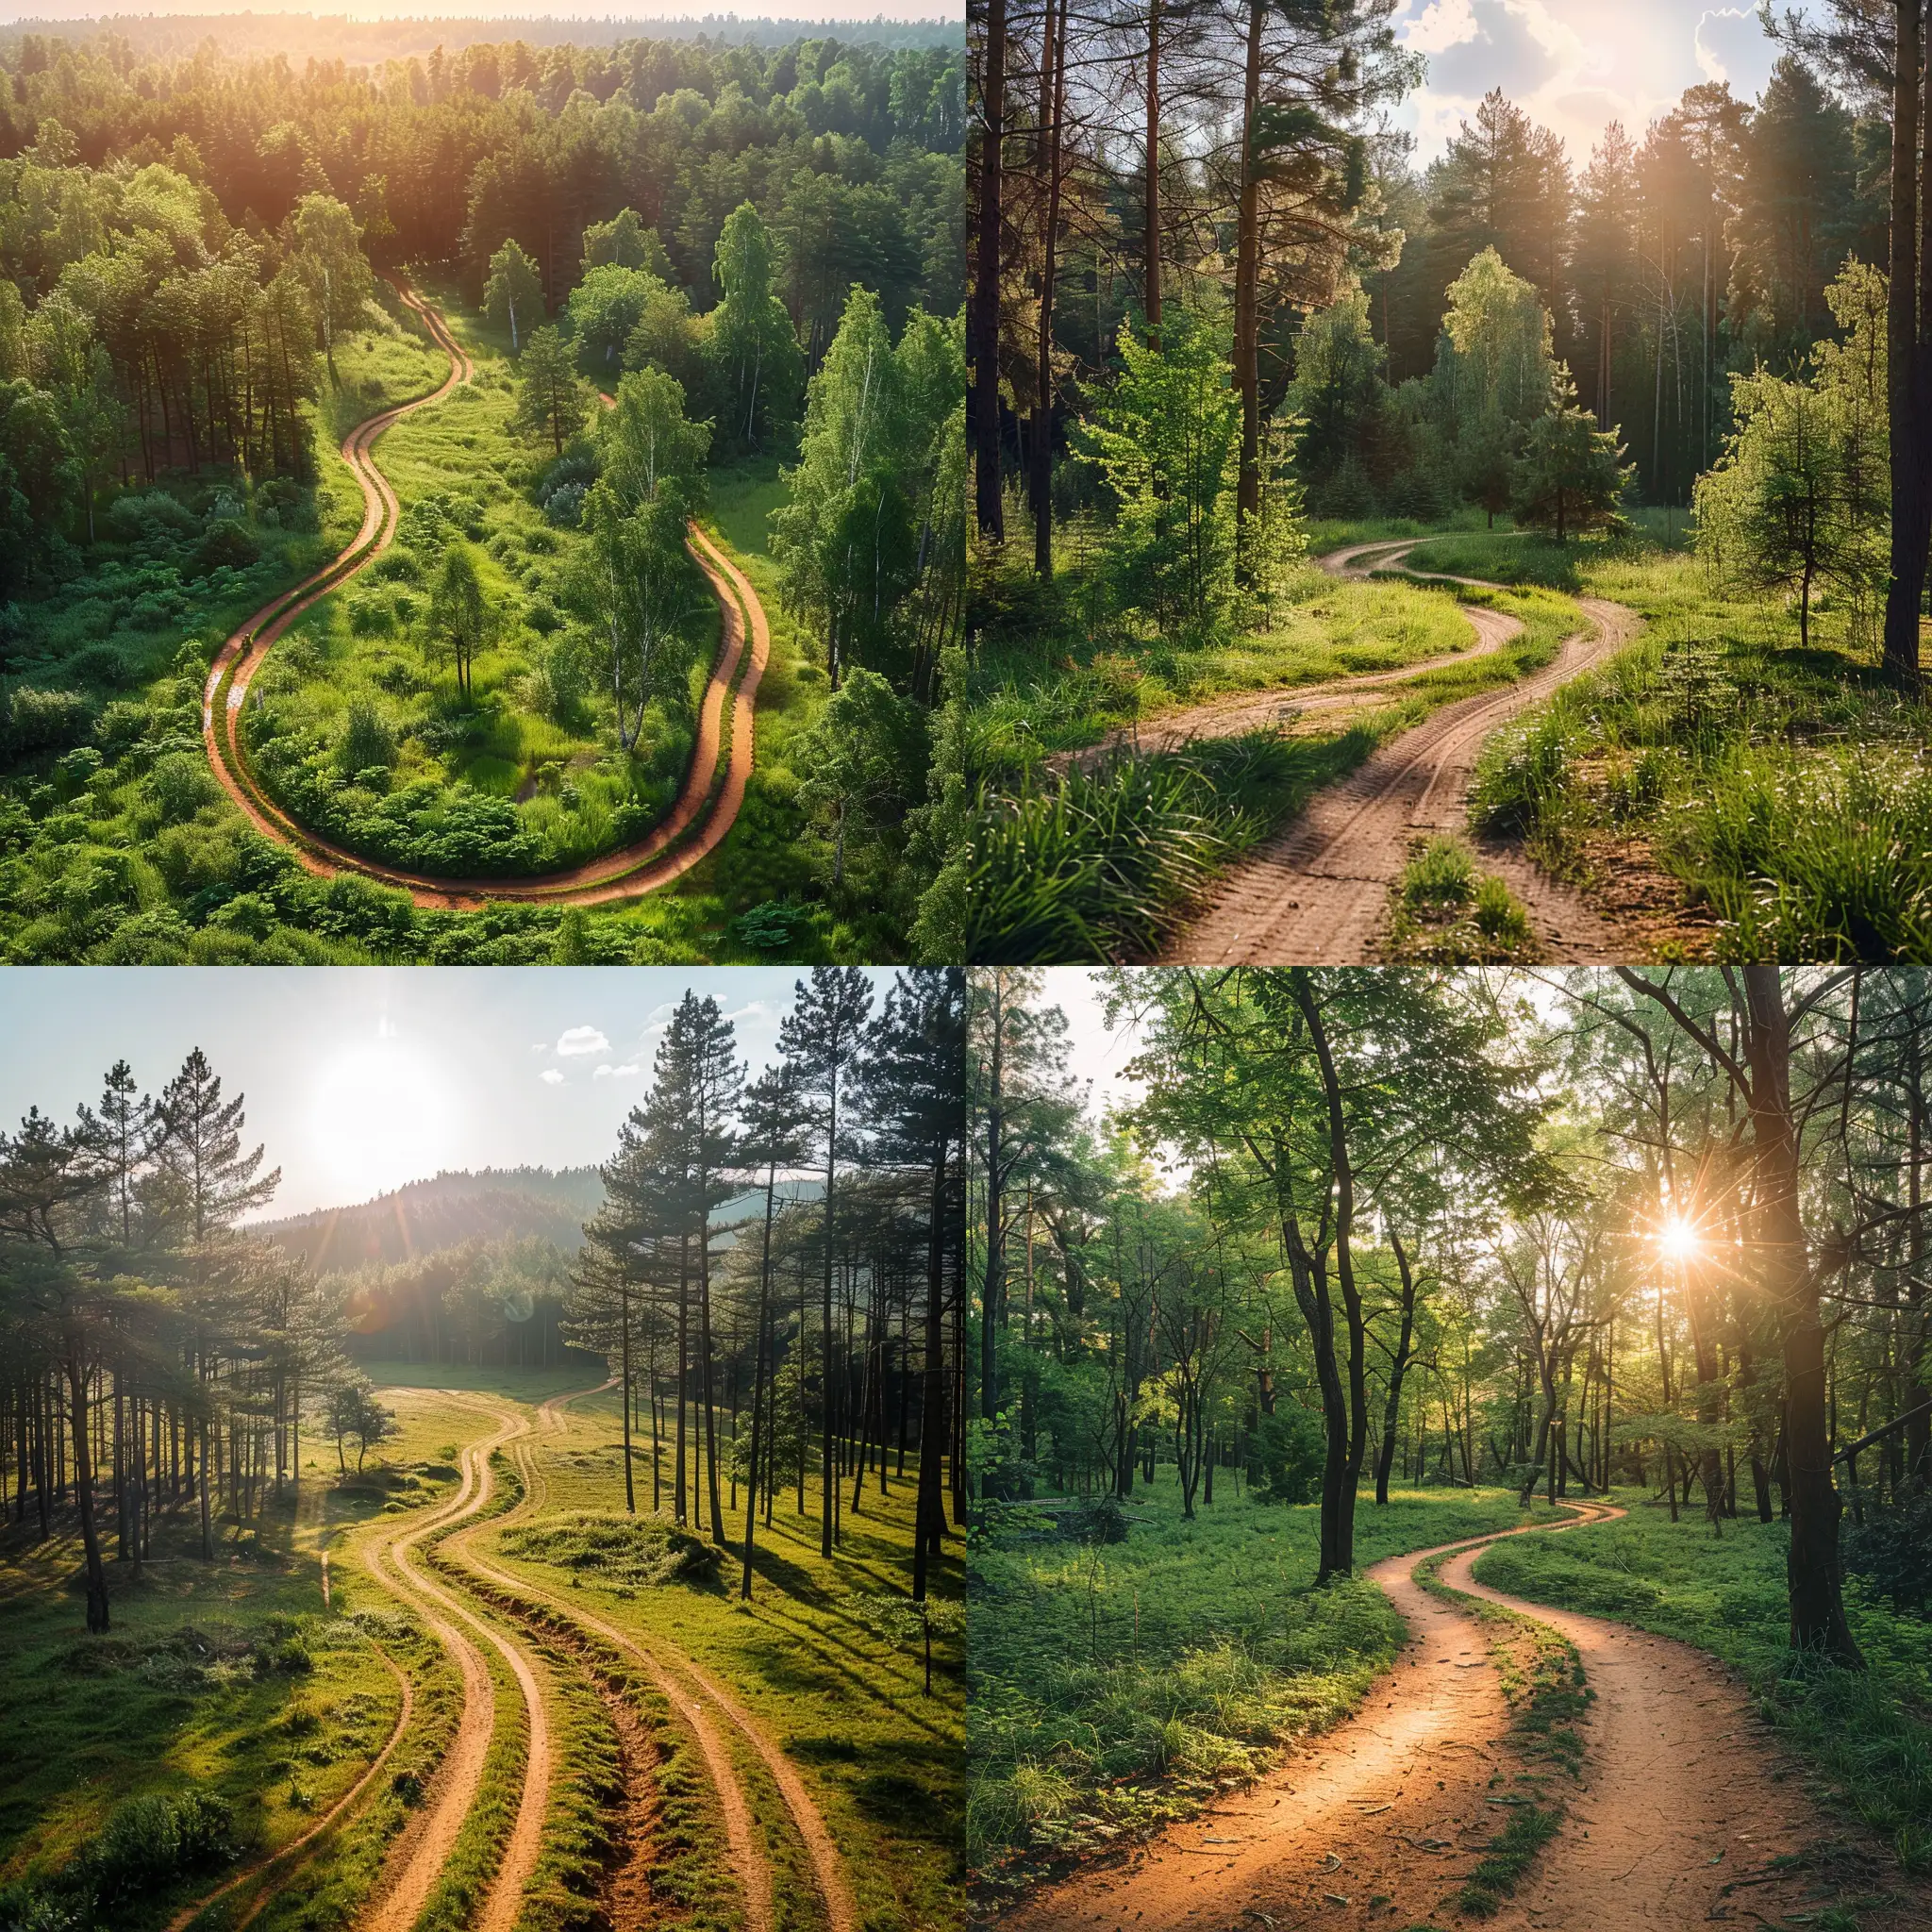 forest clearing sunny landscape with curvy dirt road in the middle